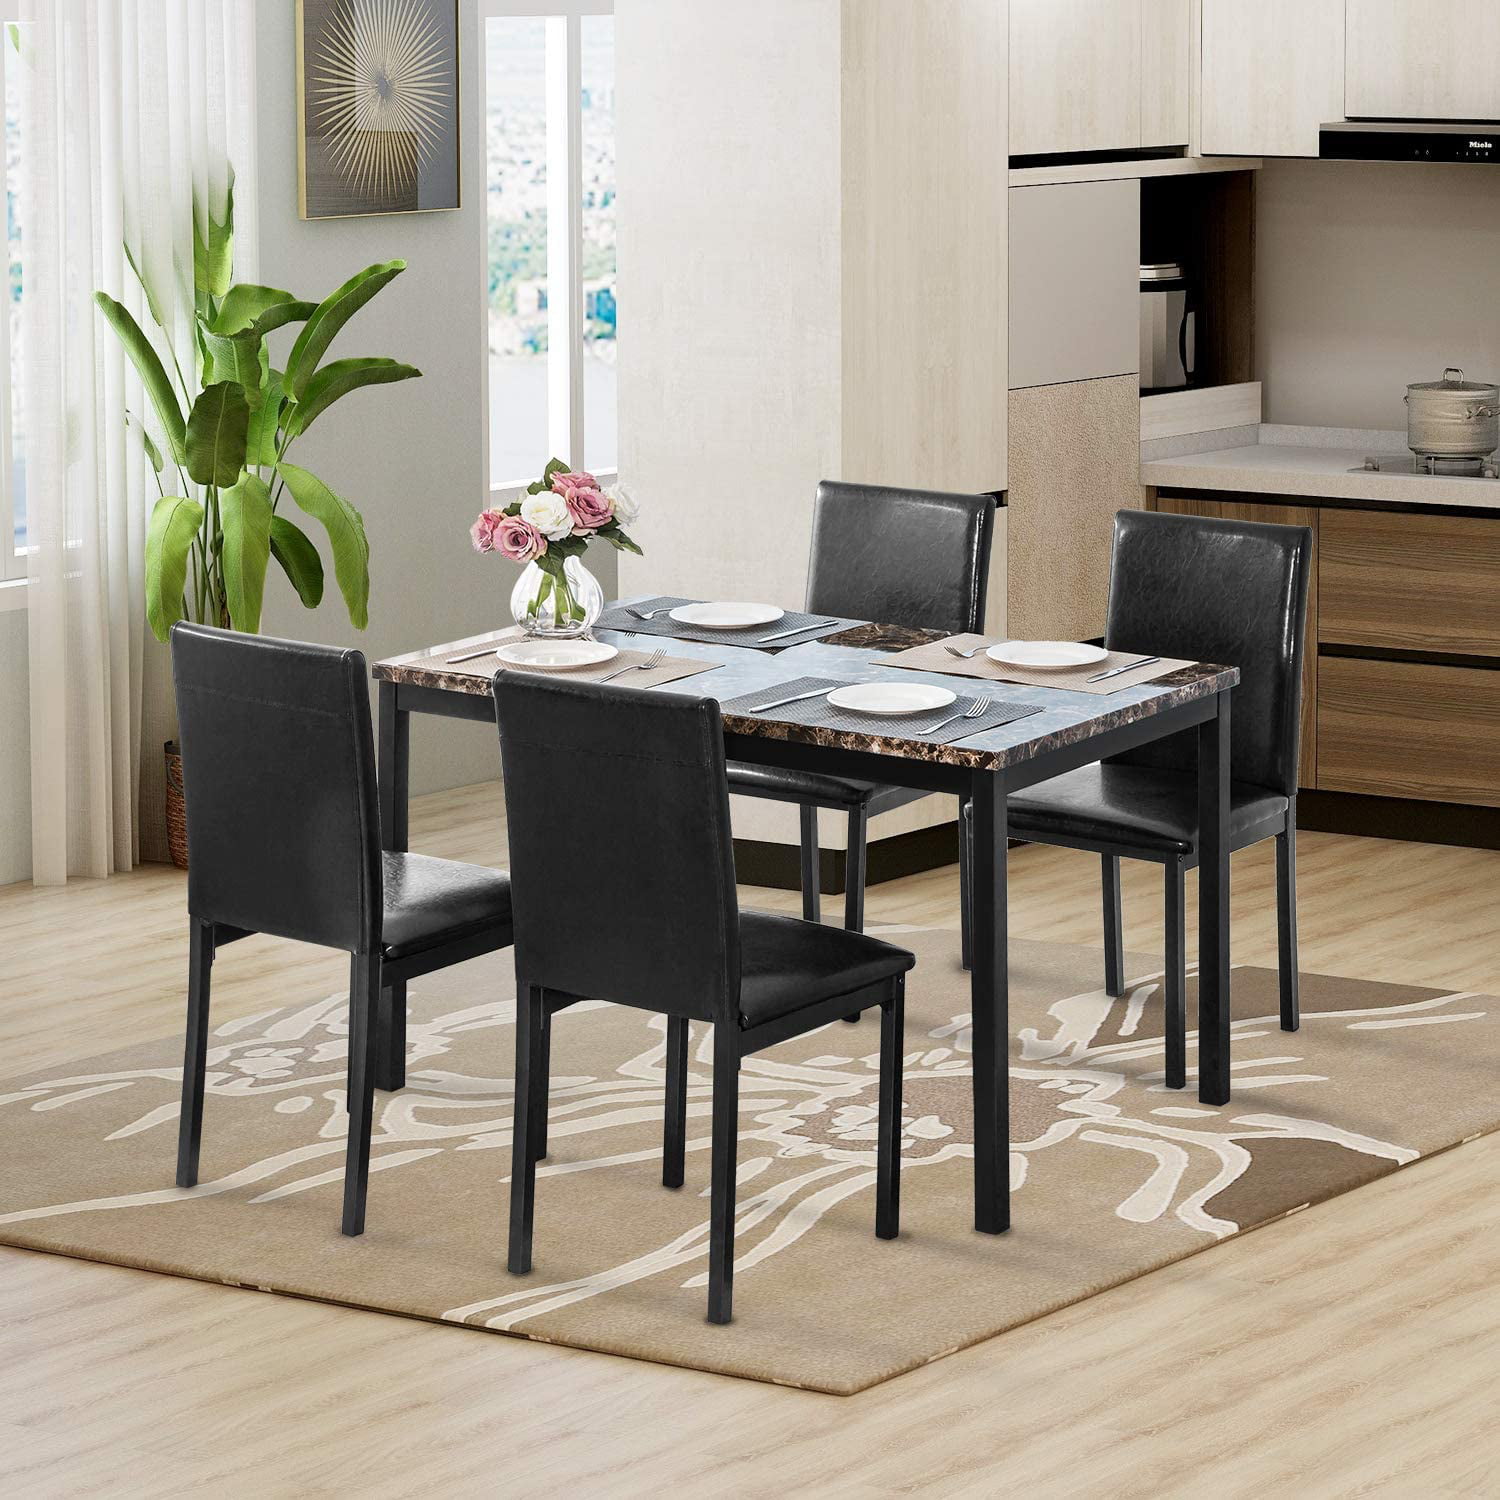 Metal Dining Table Set With 4 Chairs, Metal Dining Room Chairs Set Of 4